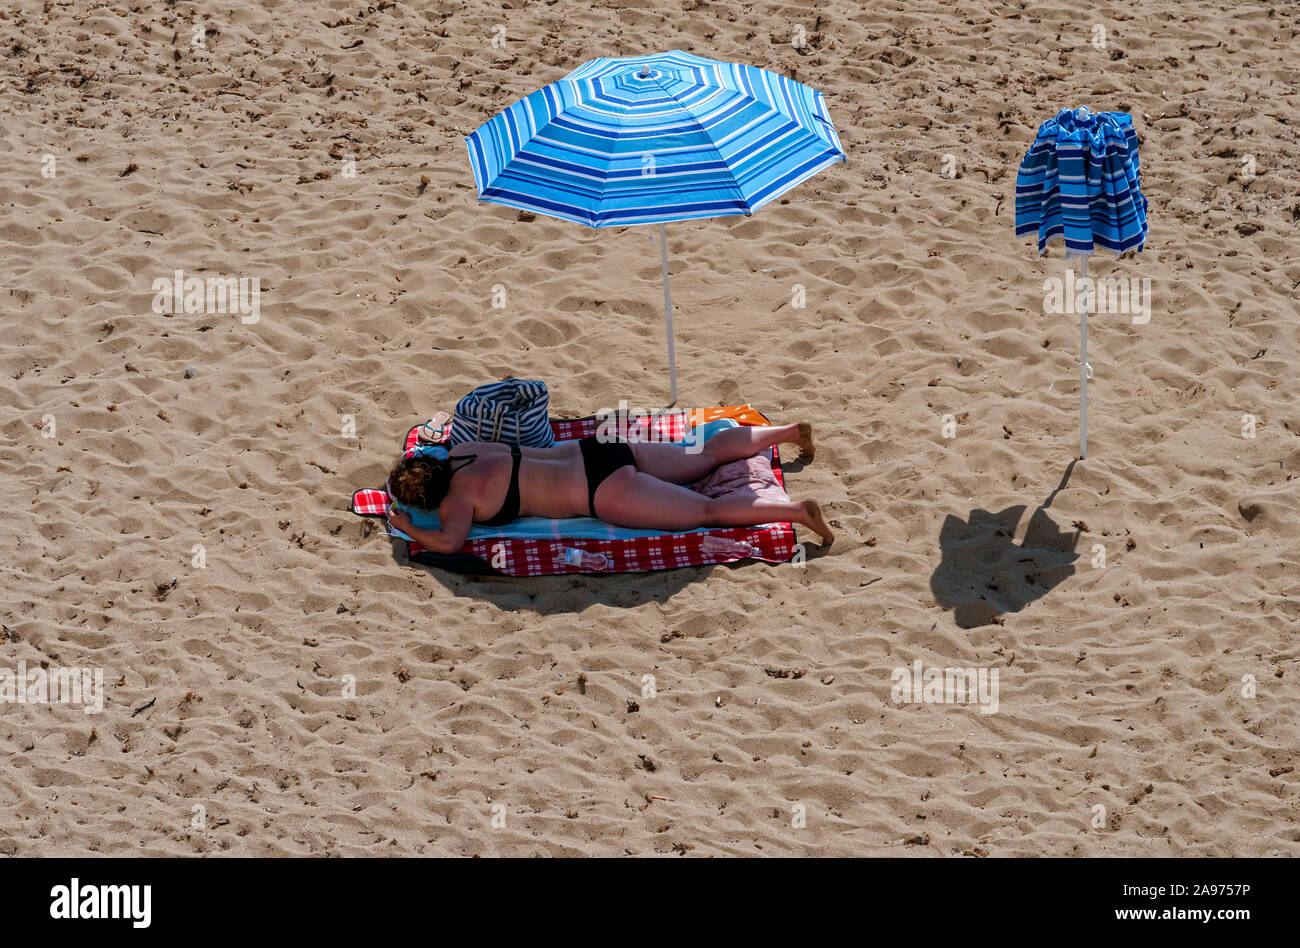 Middle-aged woman lying in the shadow of a parasol on the beach of the Mediterranean harbour at the deep blue sea Stock Photo